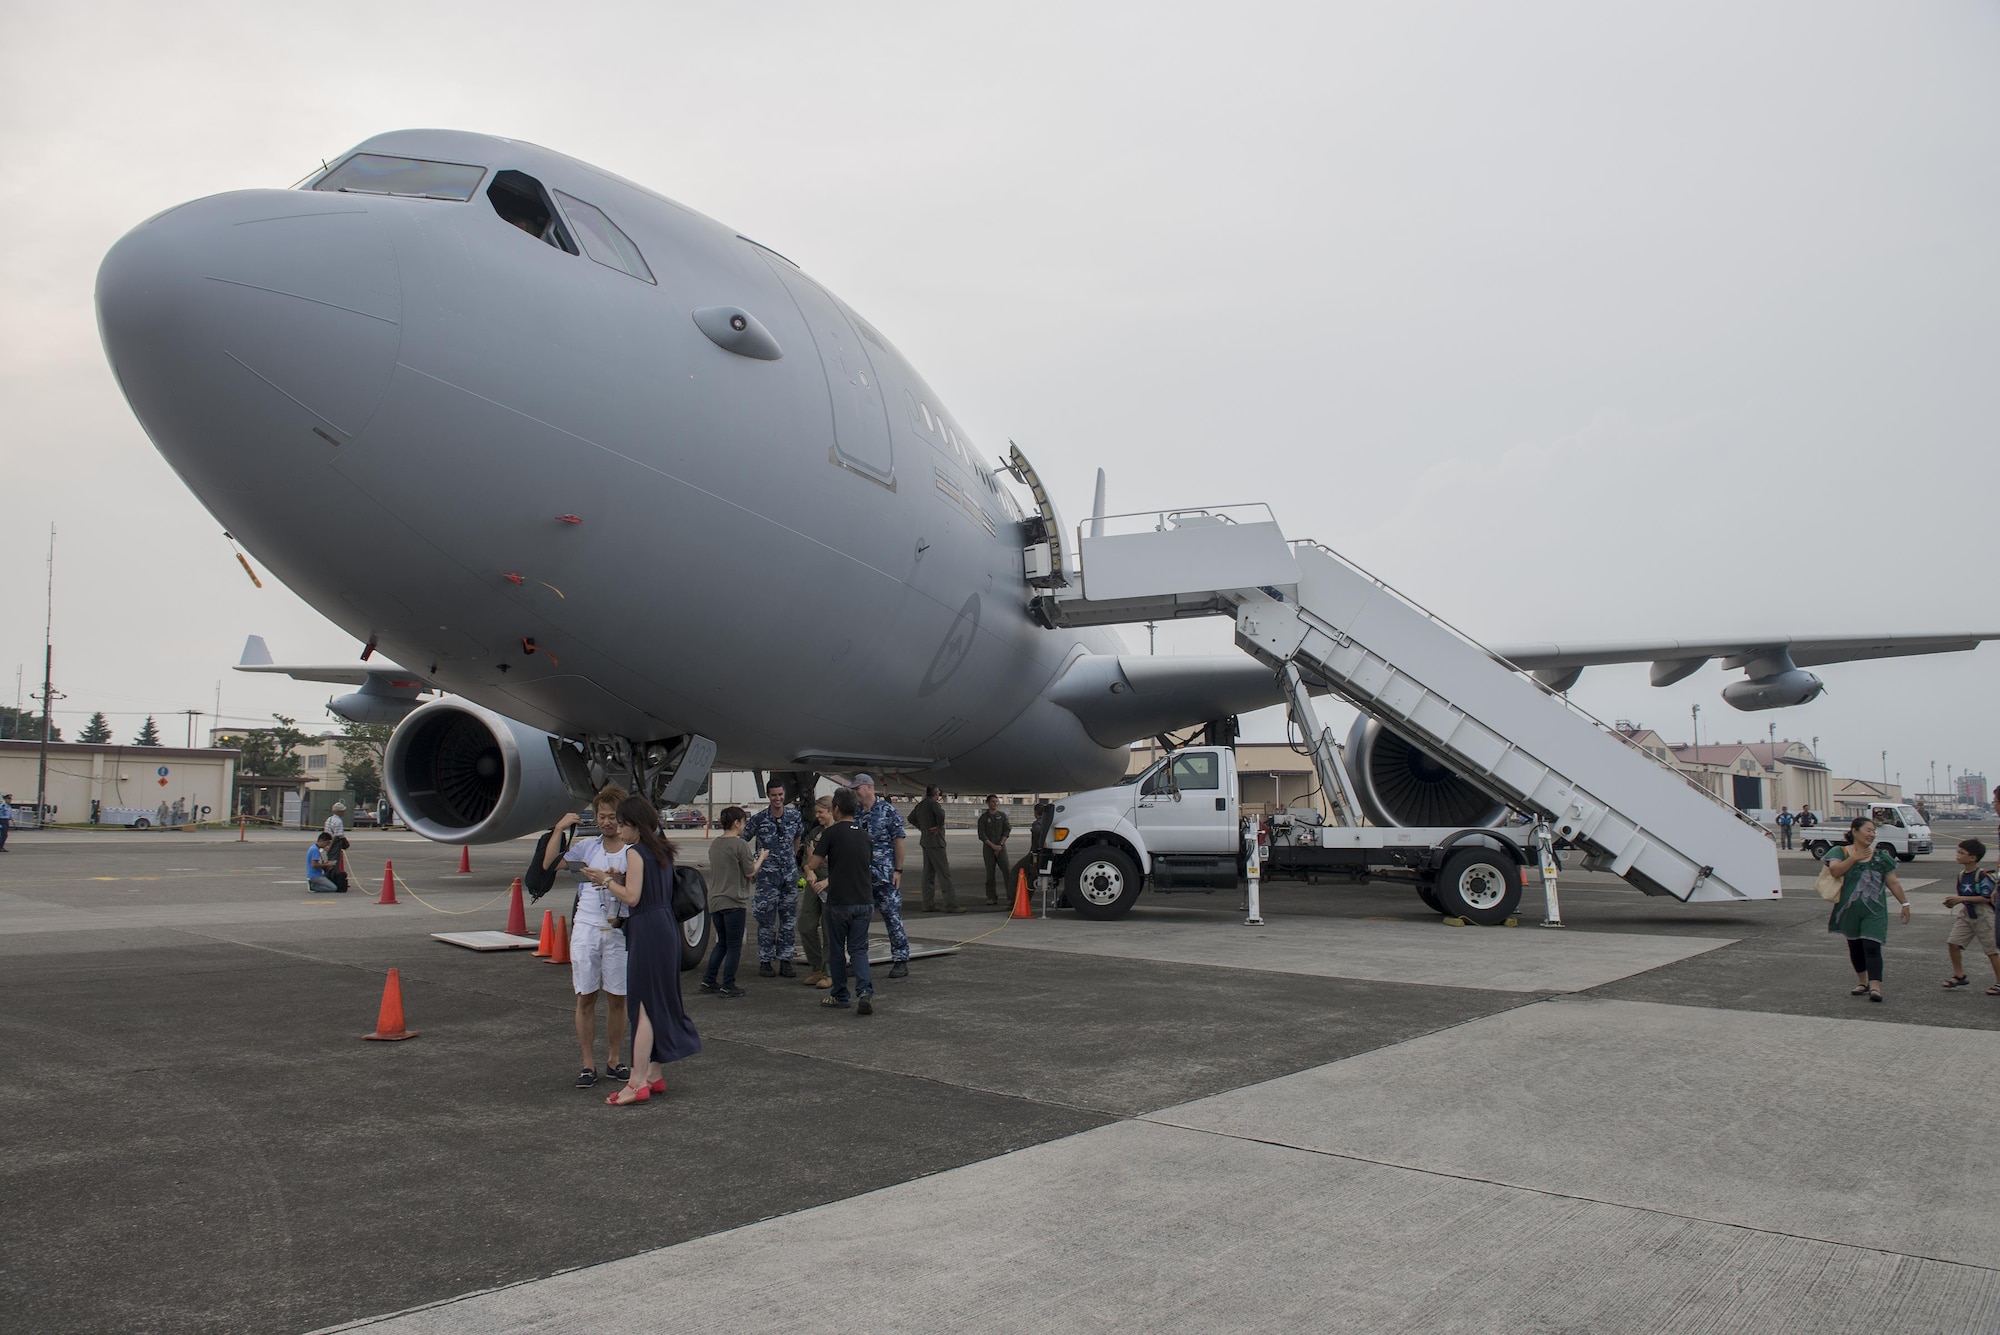 Members of the Royal Australian Air Force take part in the 2016 Friendship Festival at Yokota Air Base, Japan, Sept. 17, 2016. The event also included live band performances, a strongman competition, aerial and static displays and a military working dog demonstration. (U.S. Air Force photo by Senior Airman David C. Danford/Released)